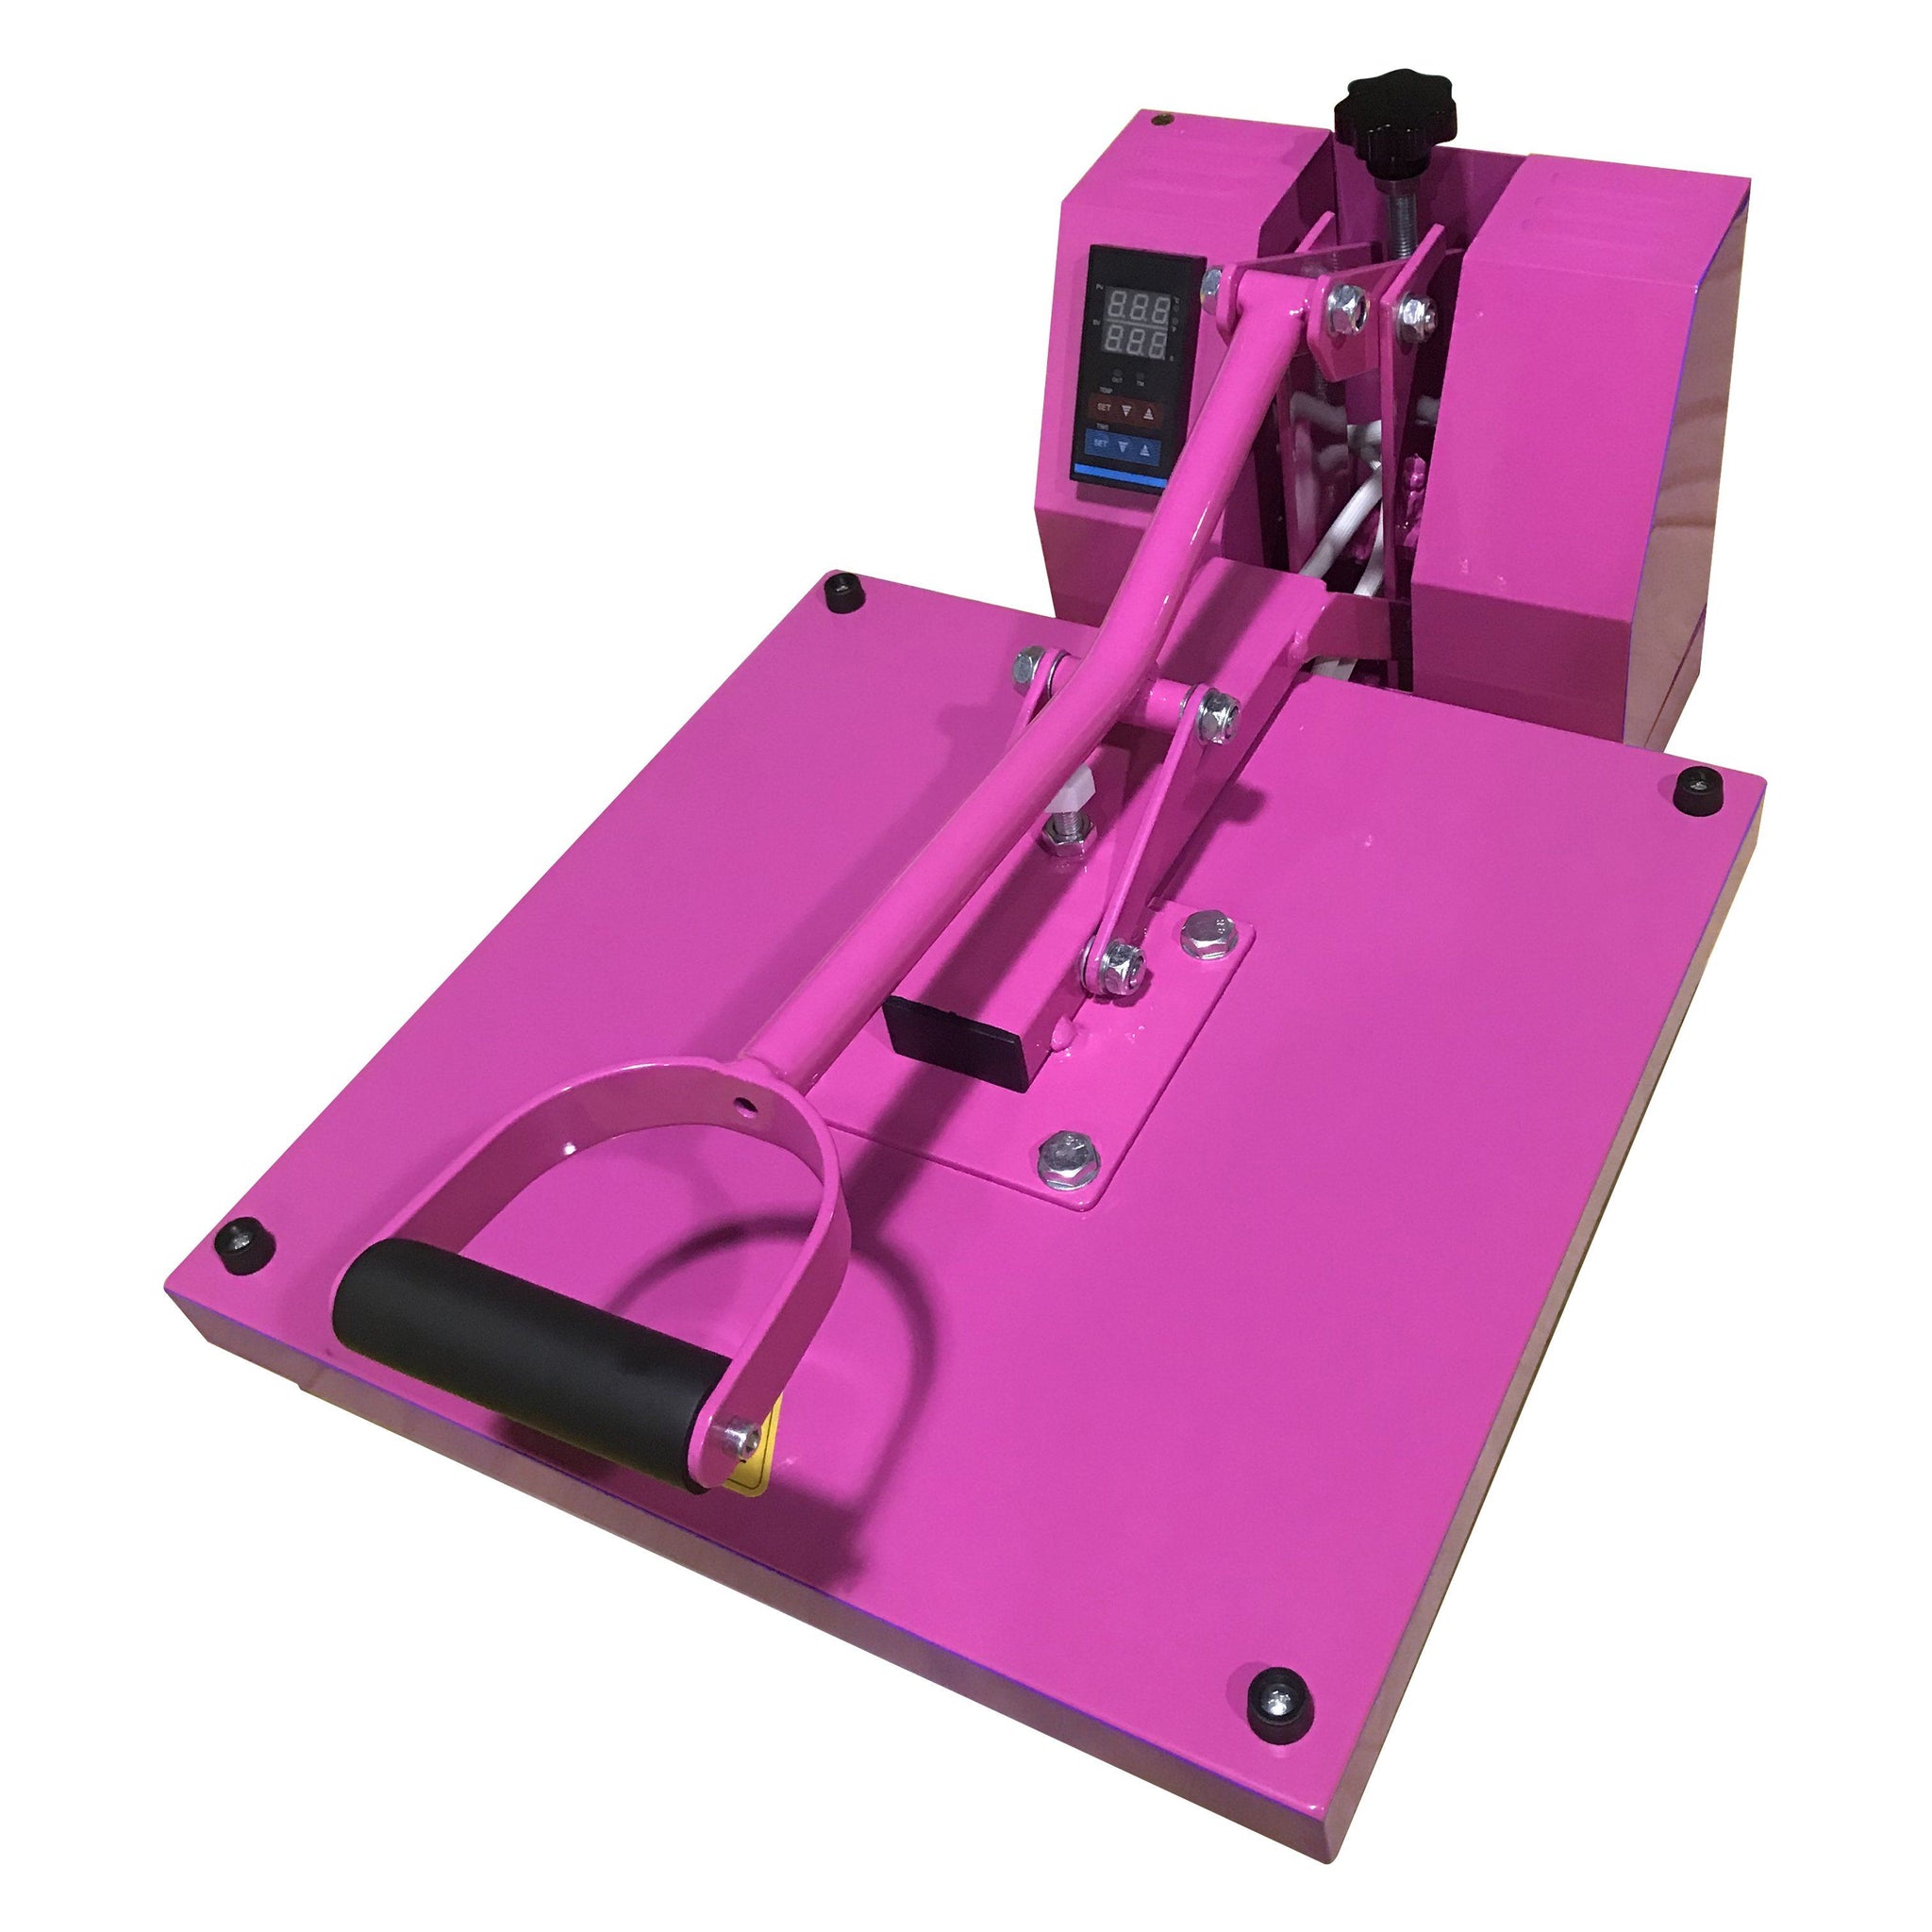 Pink craft hobby heat press machine, small size heat press, Hobby heat  press - Microtec Heat Press Factory: Pioneering Heat Transfer Excellence  for 23 Years, from small size heat press machine, combo